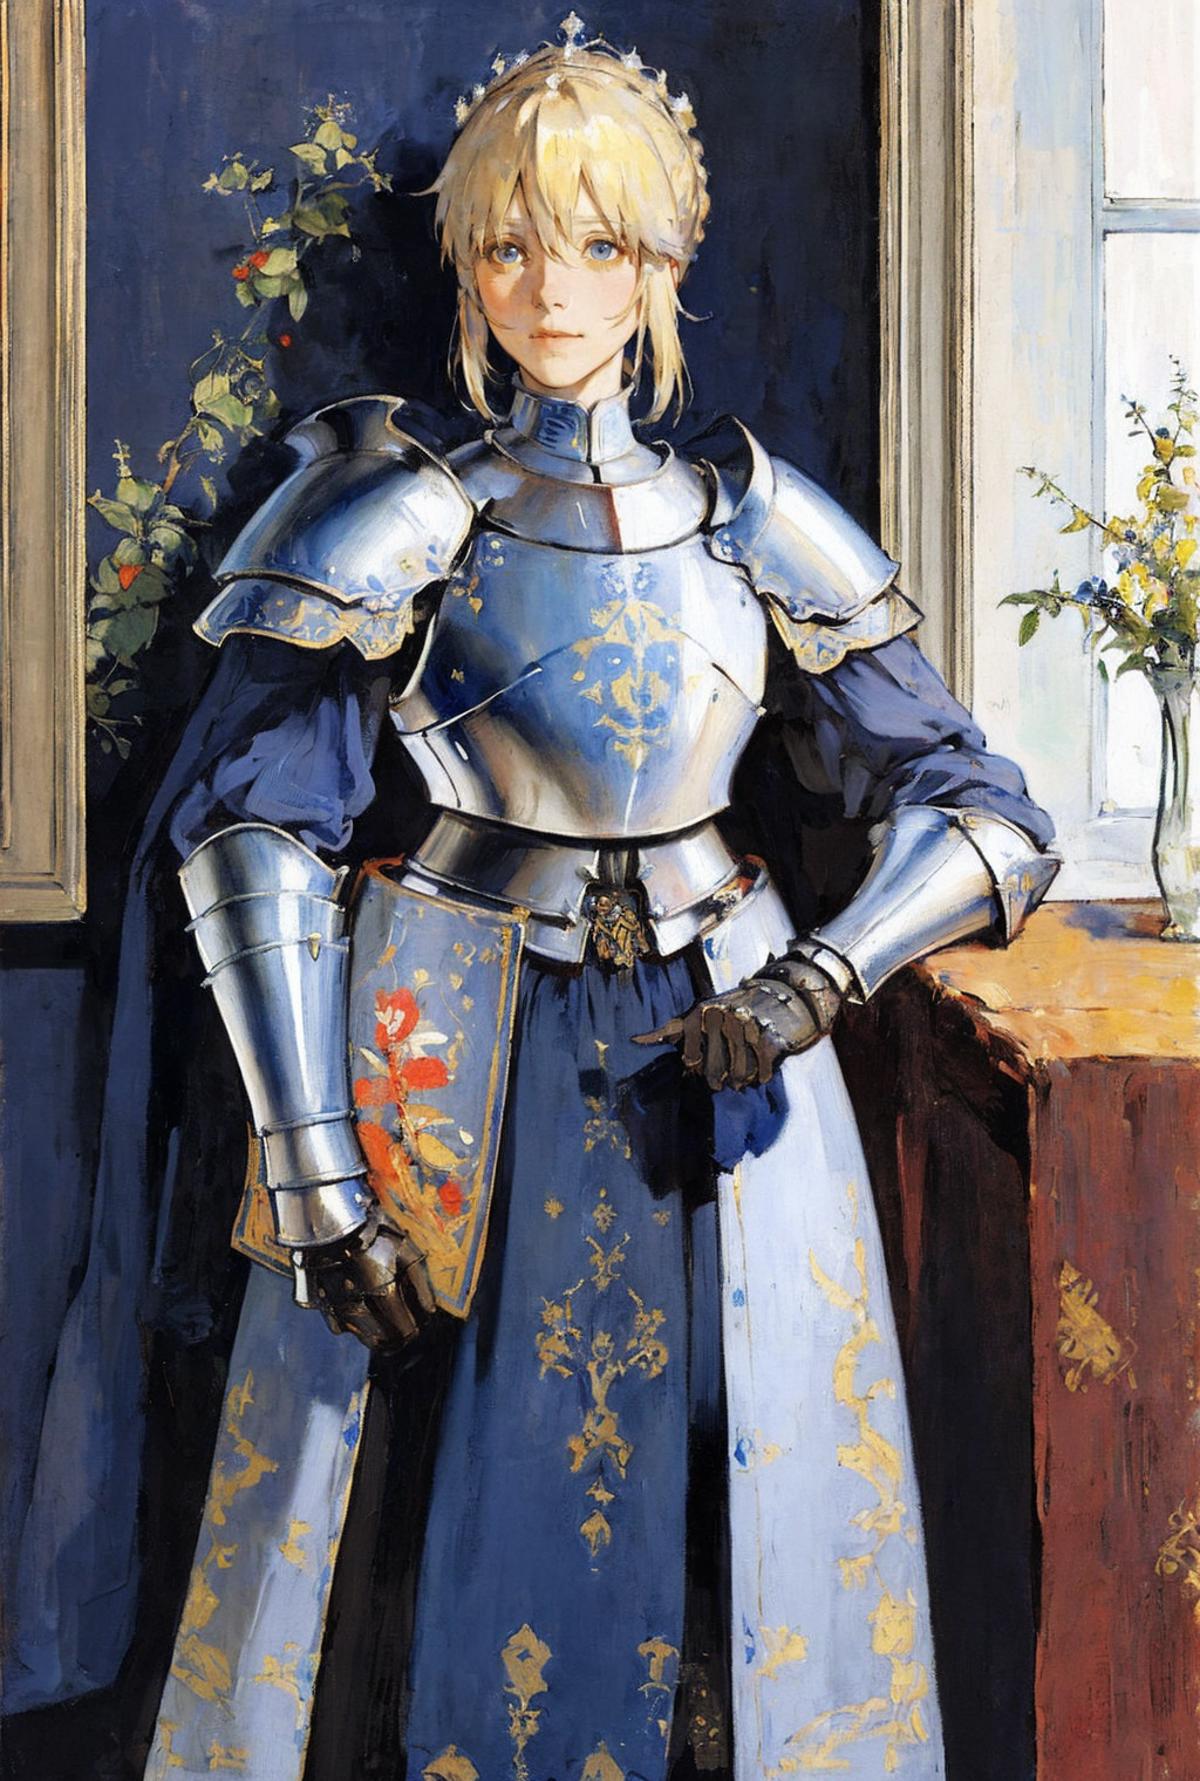 A Painted Woman in Medieval Armor and Blue Dress